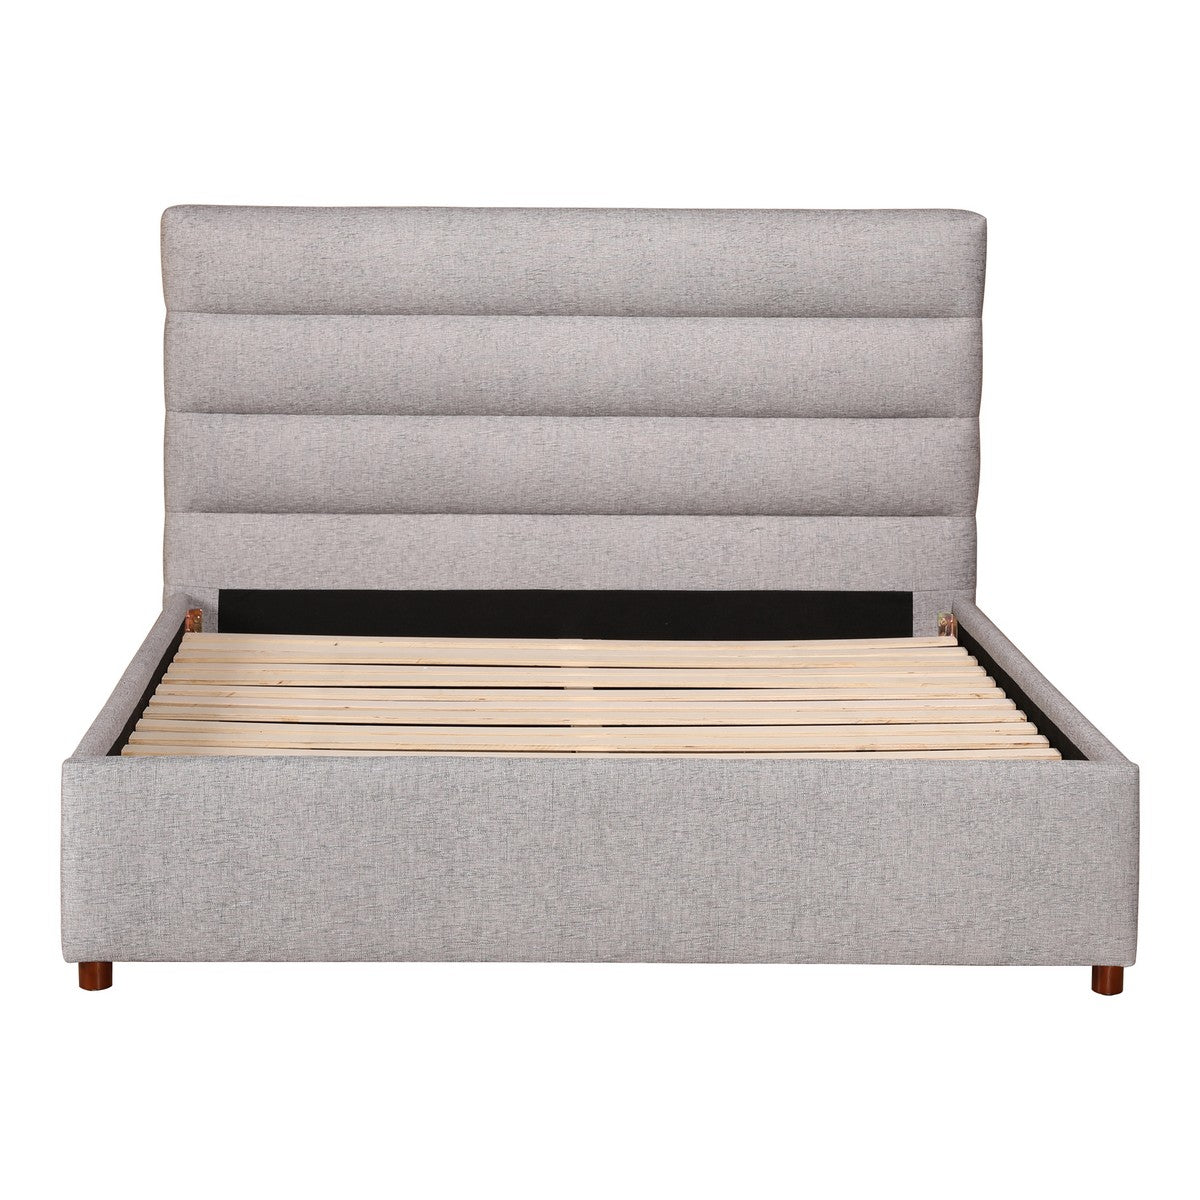 Moe's Home Collection Takio King Bed Light Grey - RN-1140-29 - Moe's Home Collection - Beds - Minimal And Modern - 1